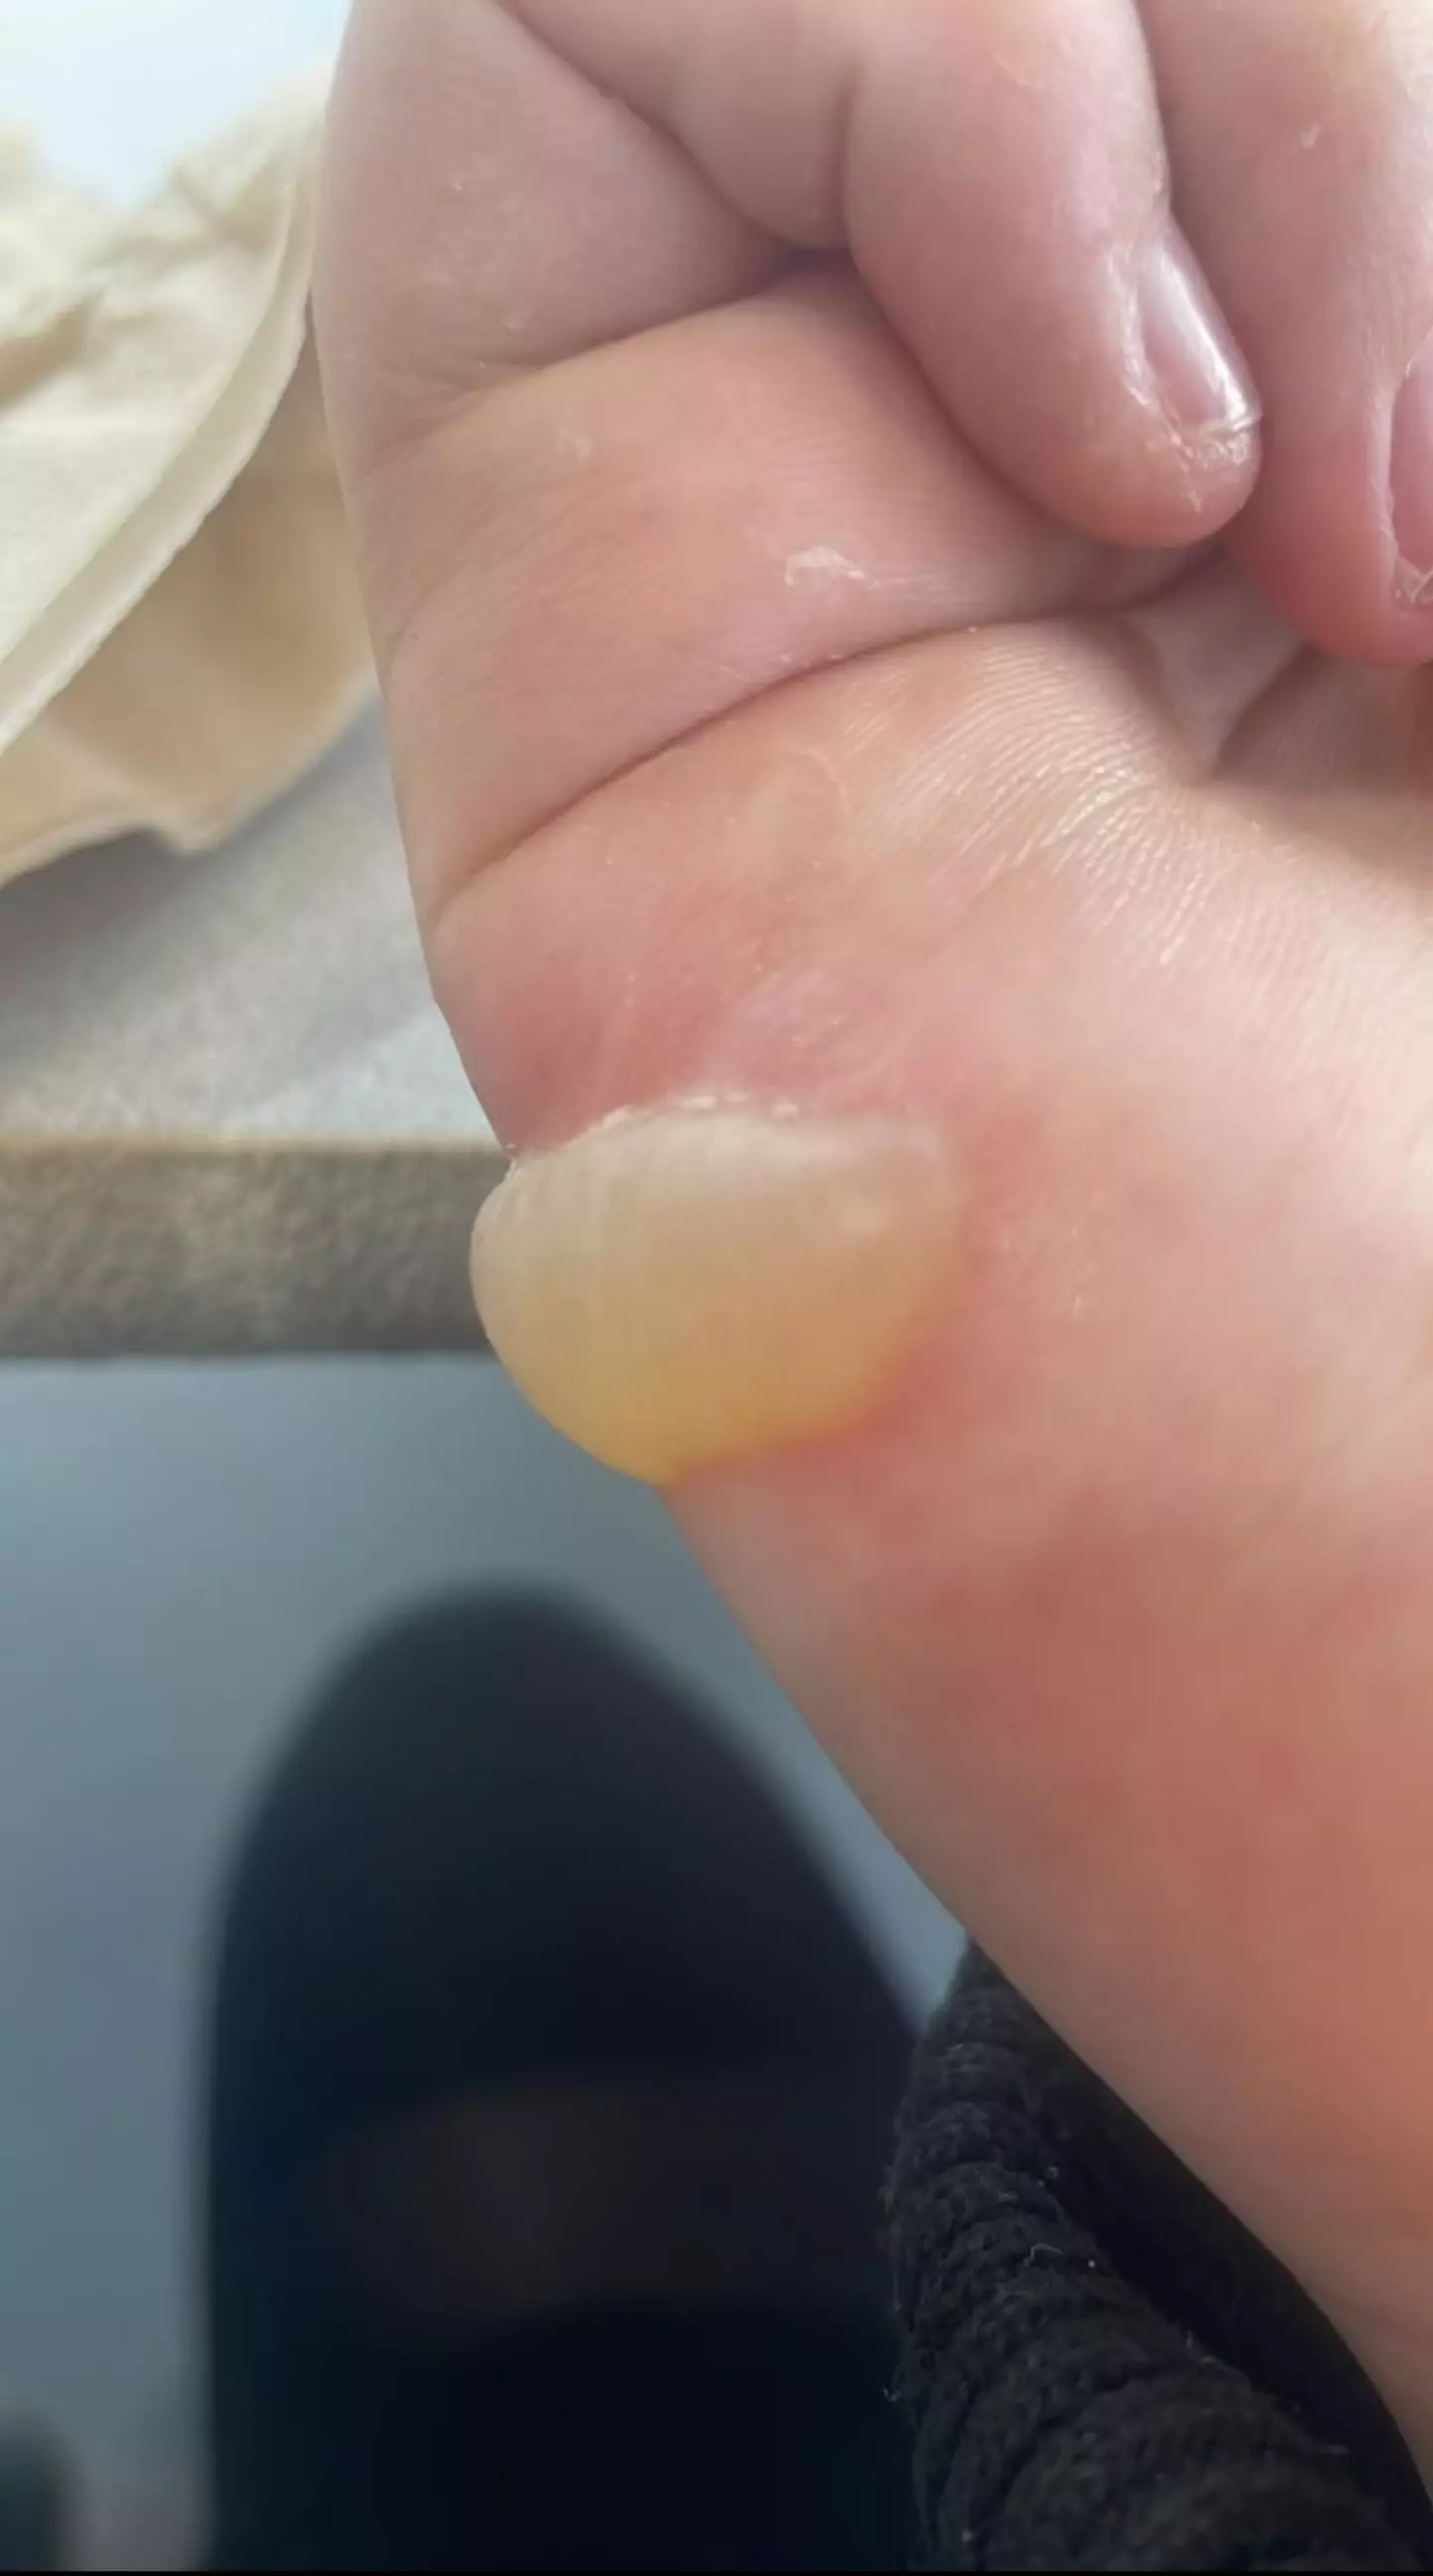 Chloe's blisters reached 'about 6 cm in length'.